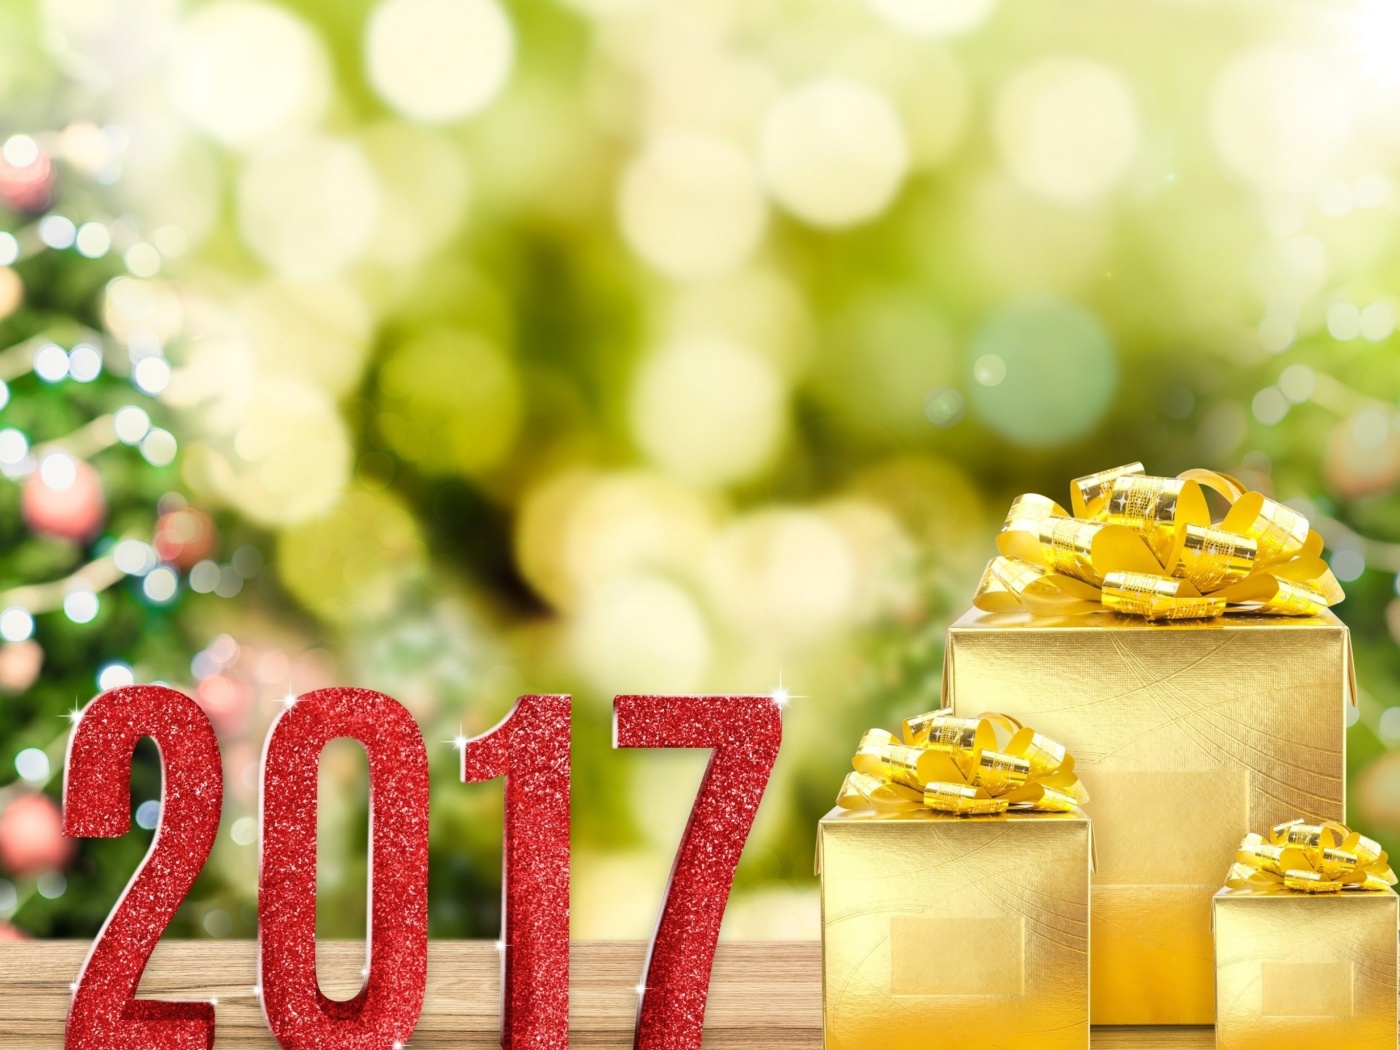 Das 2017 New Year with Gold Gift Wallpaper 1400x1050